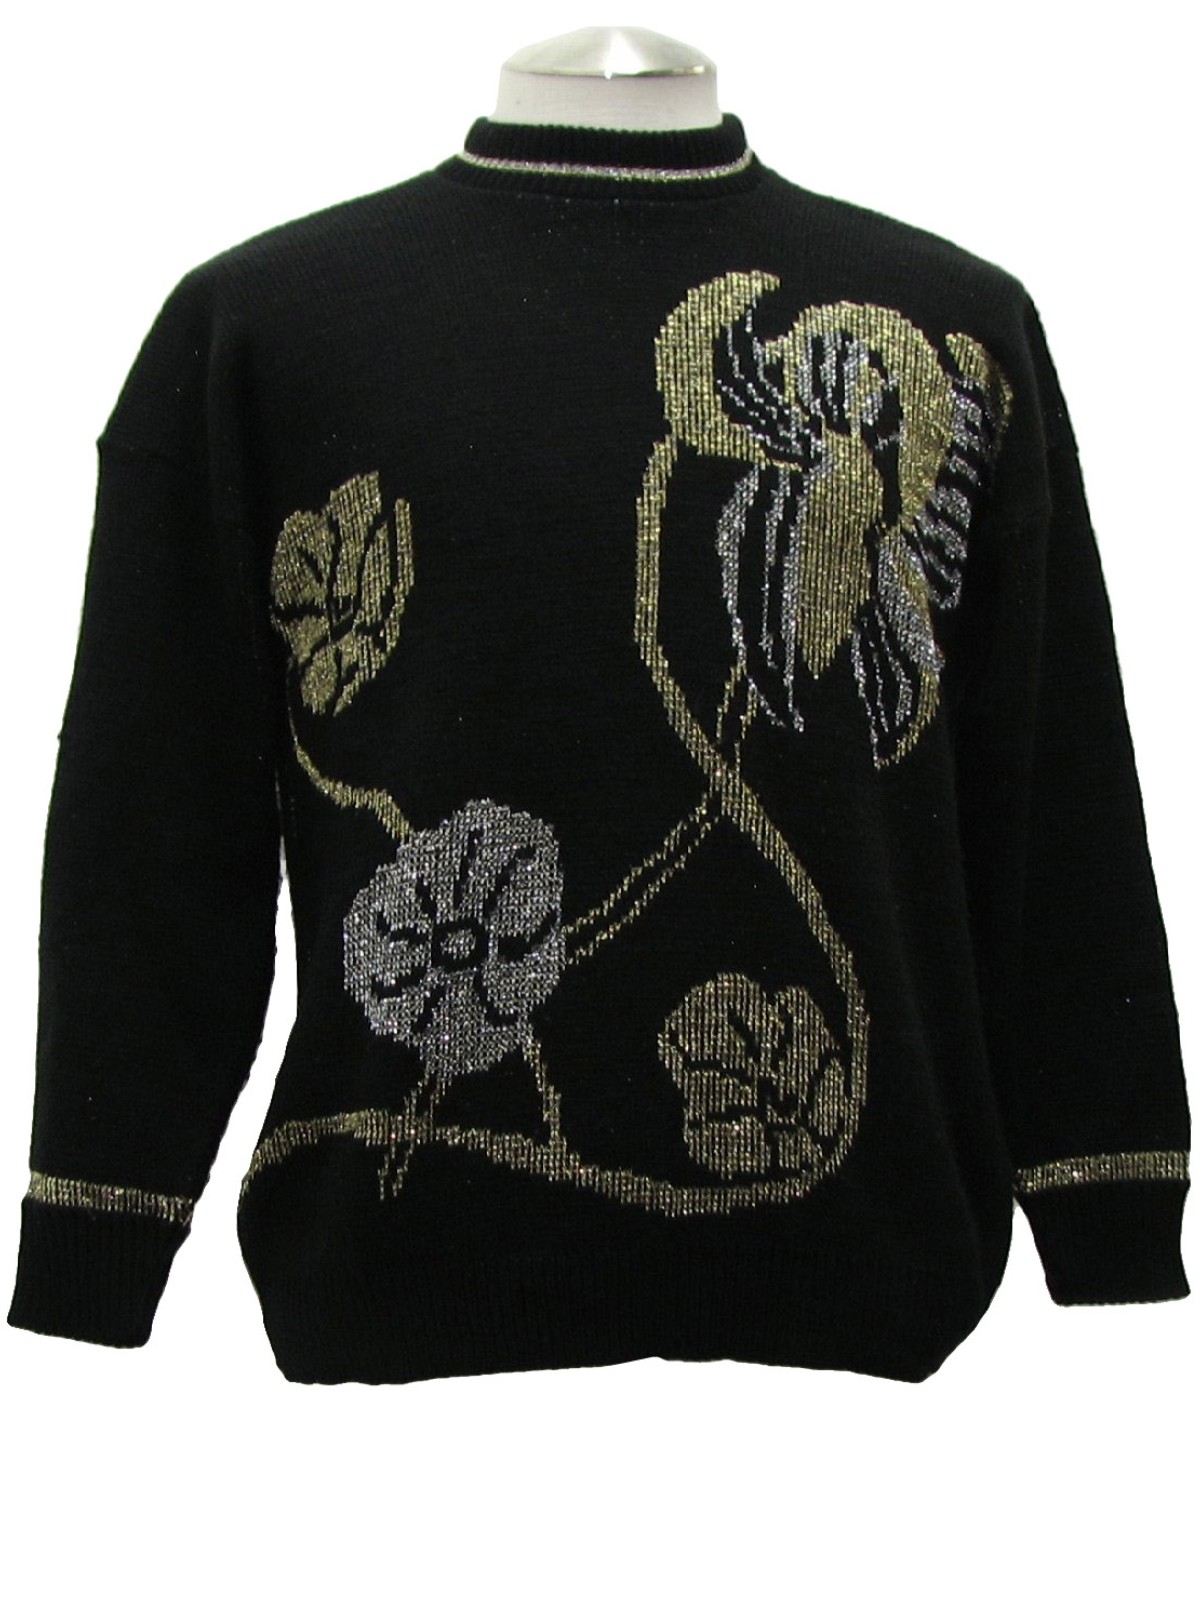 Vintage 1980's Sweater: 80s authentic vintage -Missing Label- Womens ...